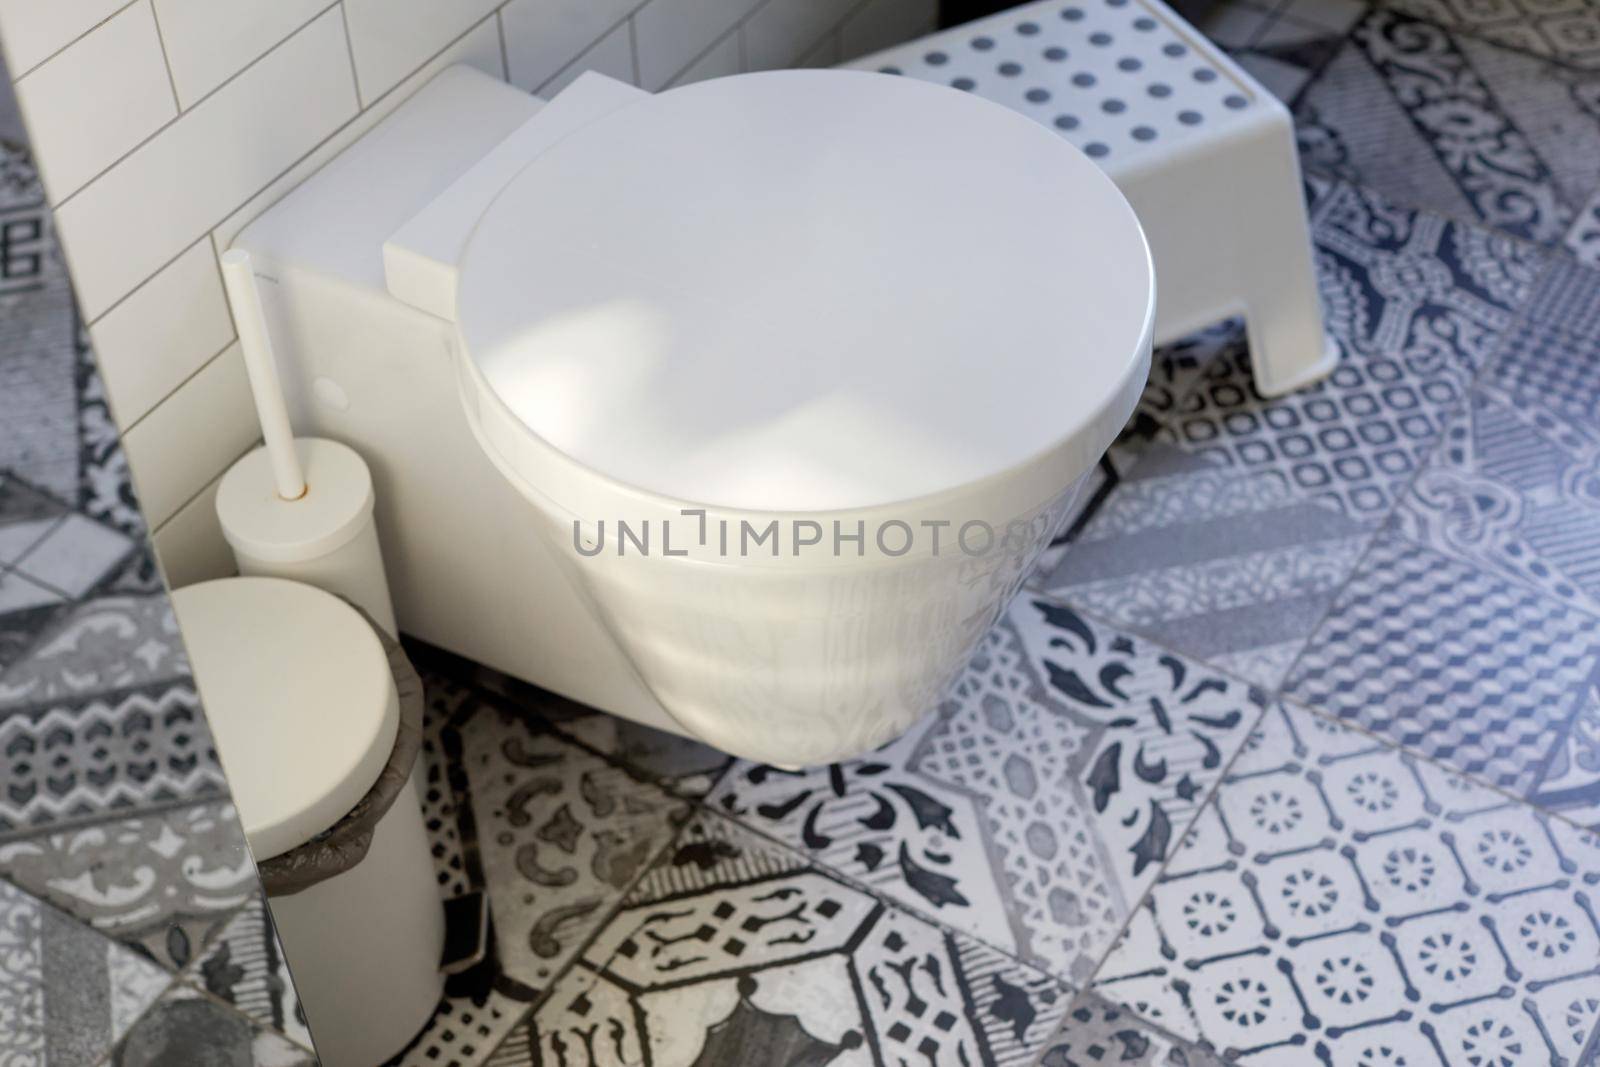 Stylish home interior design of restroom with white toilet bowl and accessories on ornamental tile floor